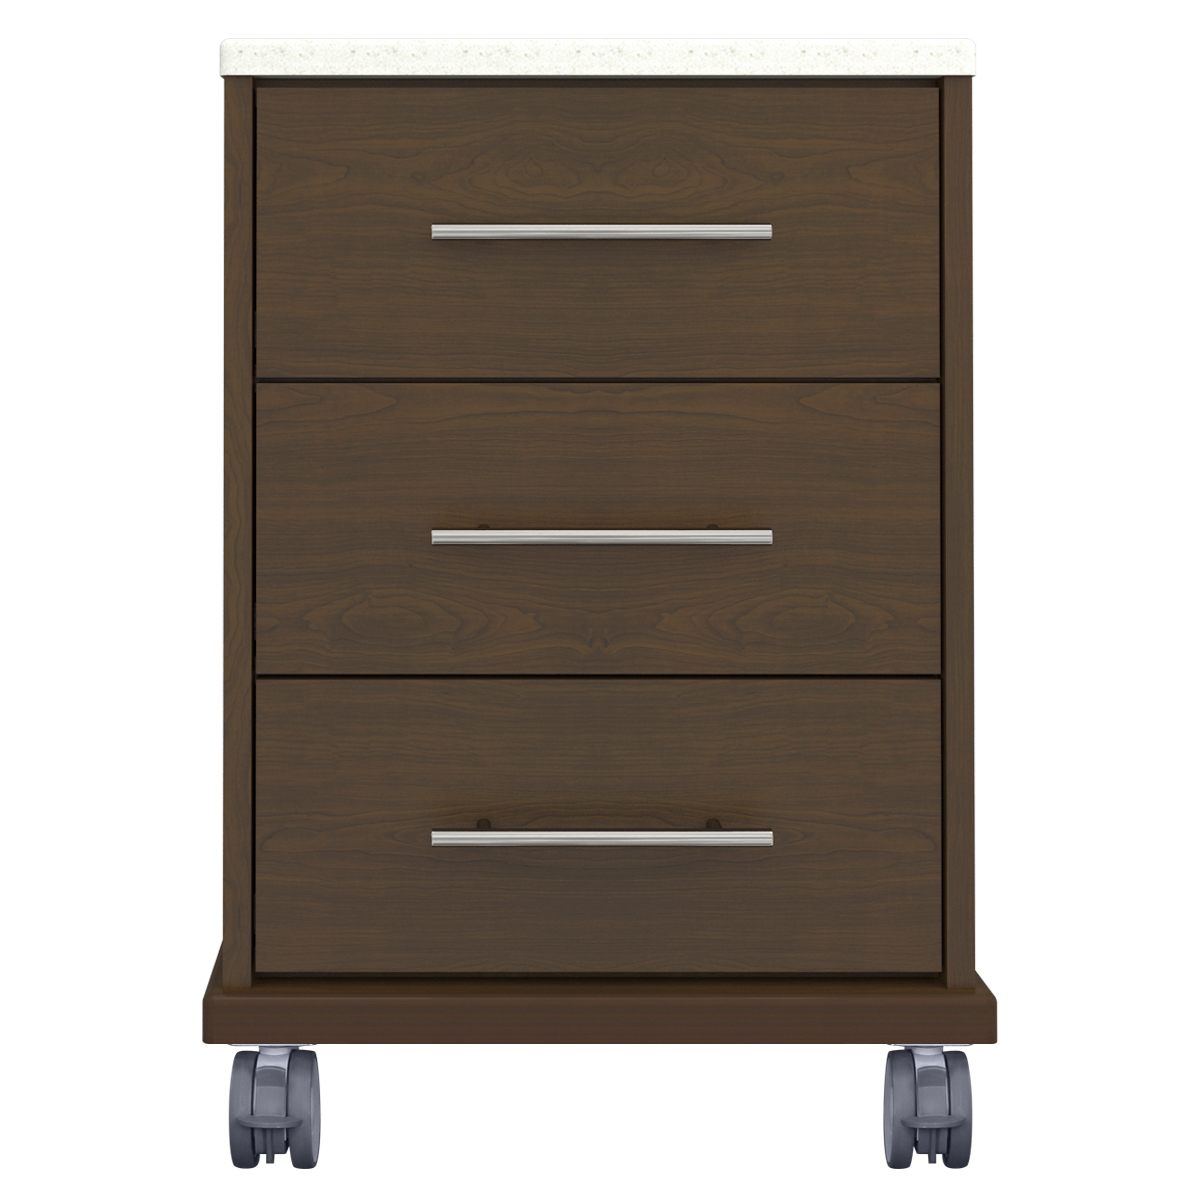 Brown bedside cabinet with three drawers on wheels.